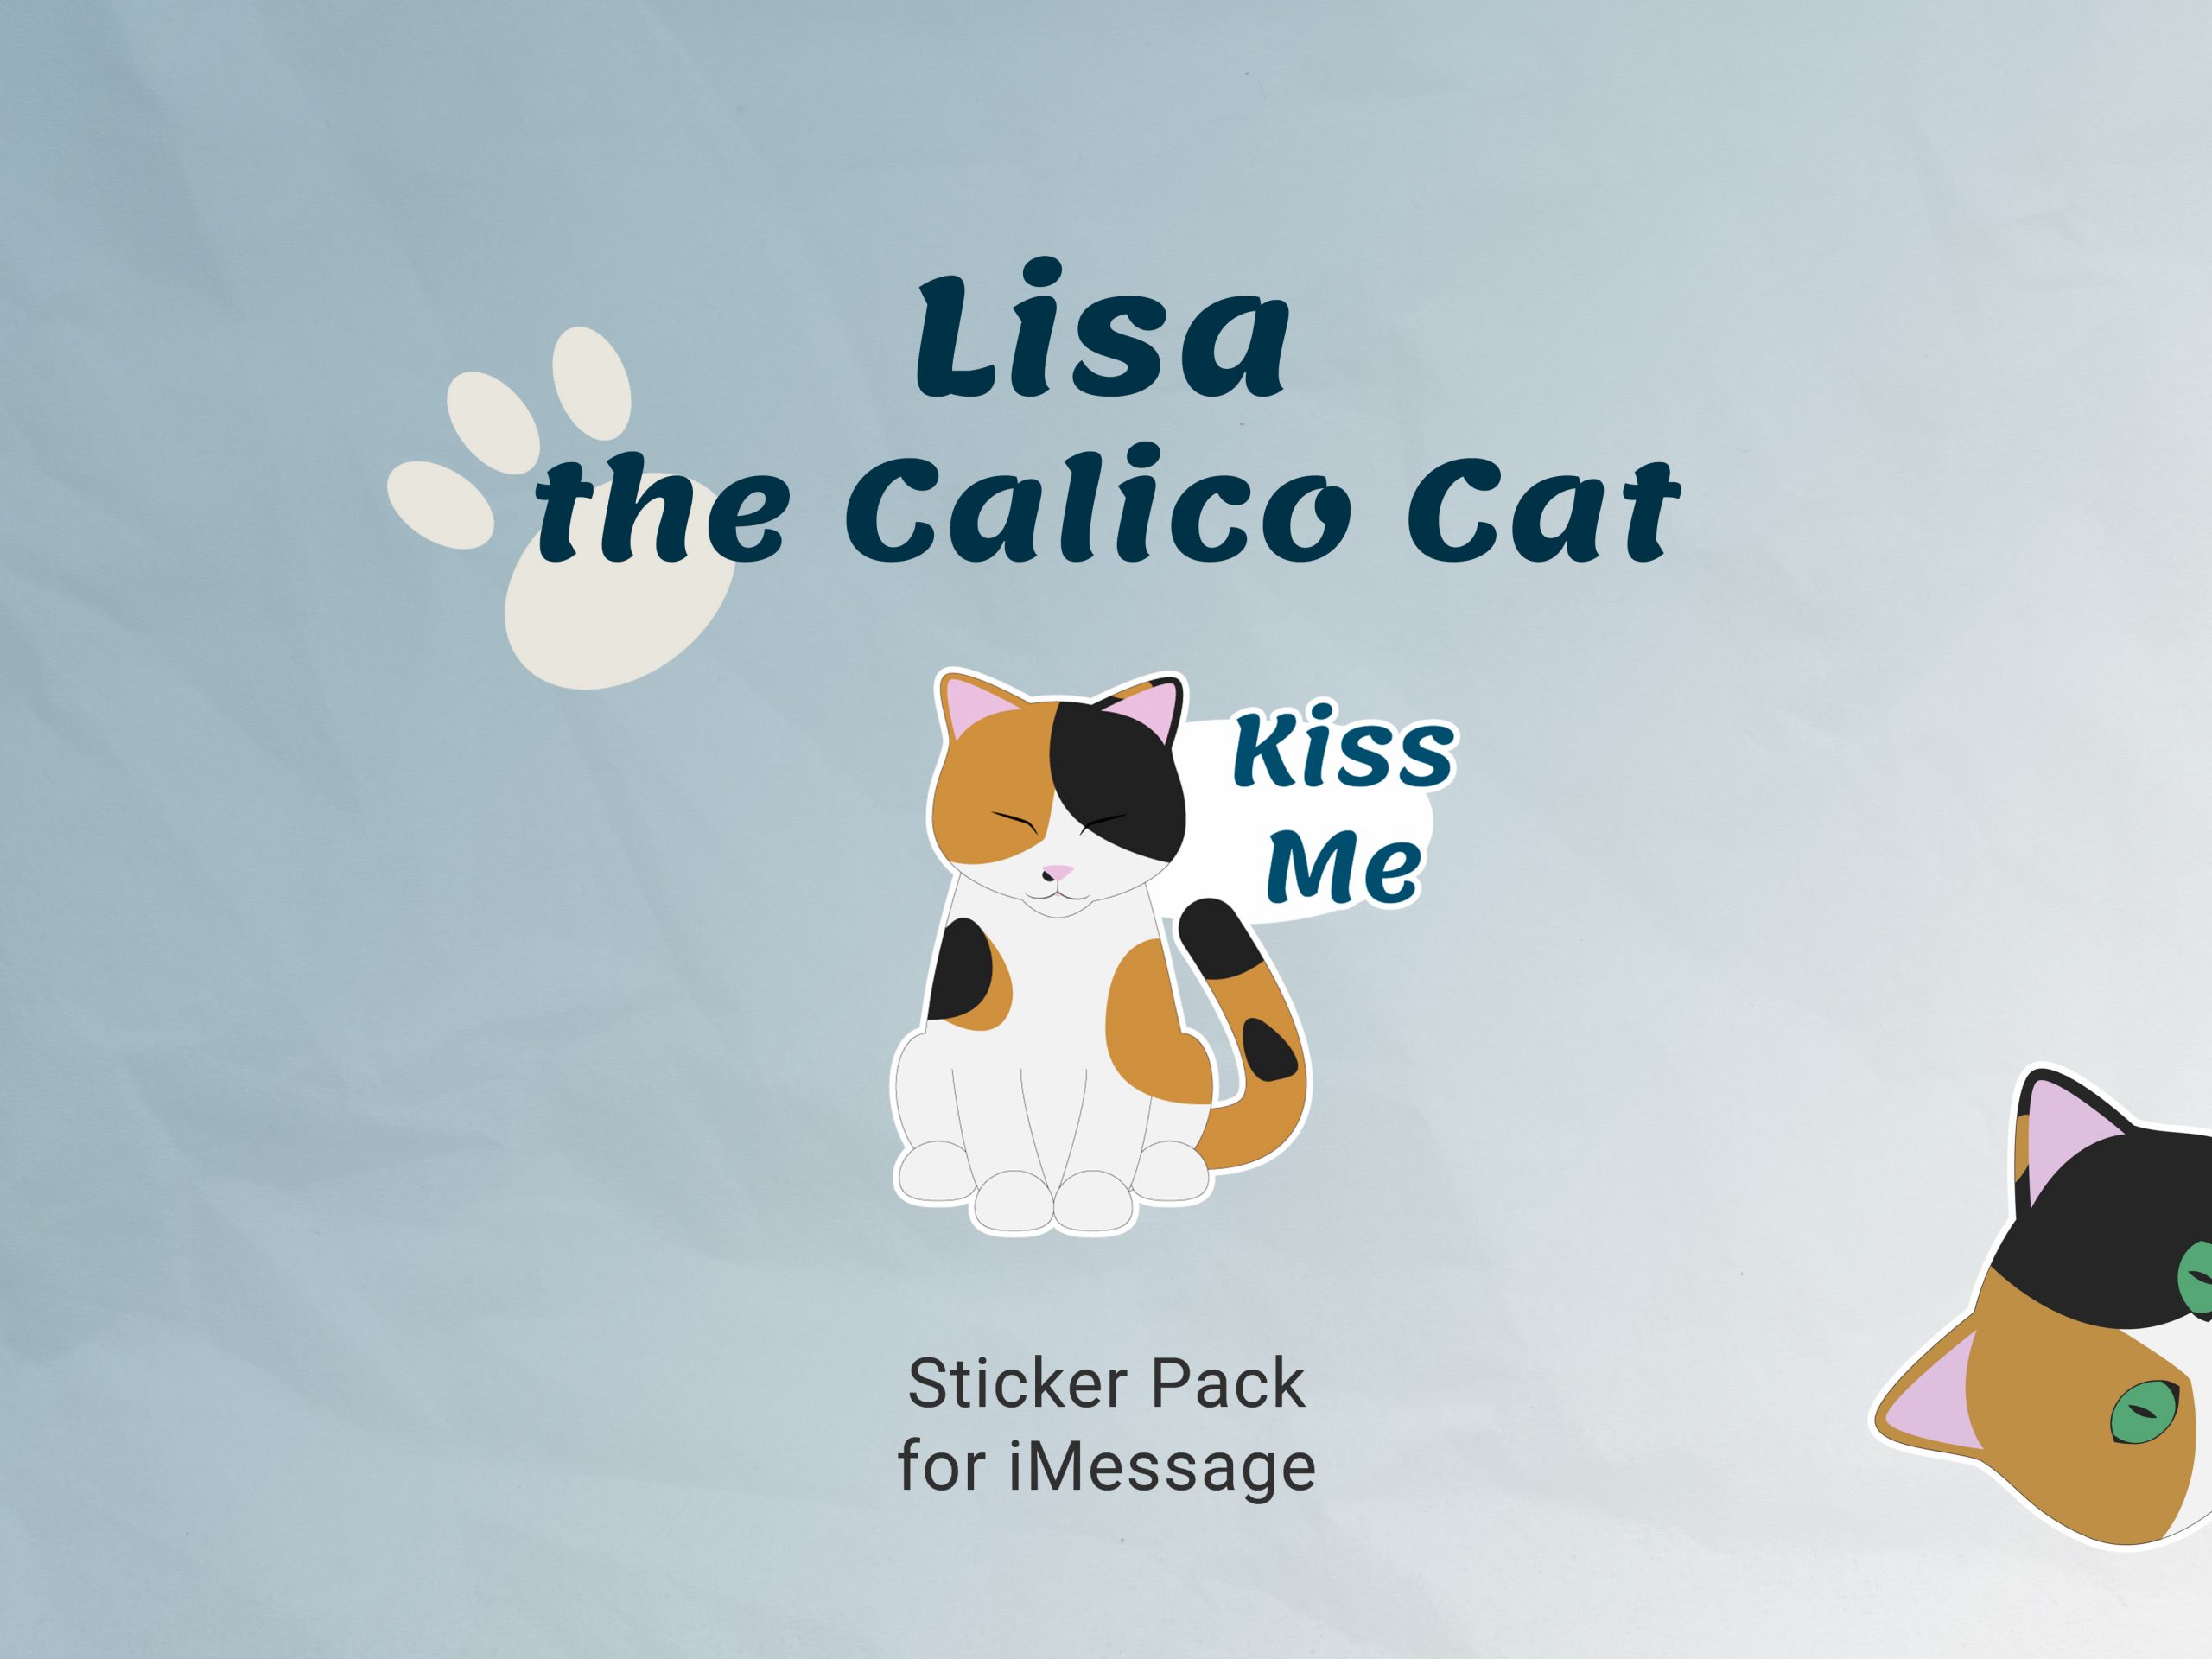 Lisa the Calico Cat